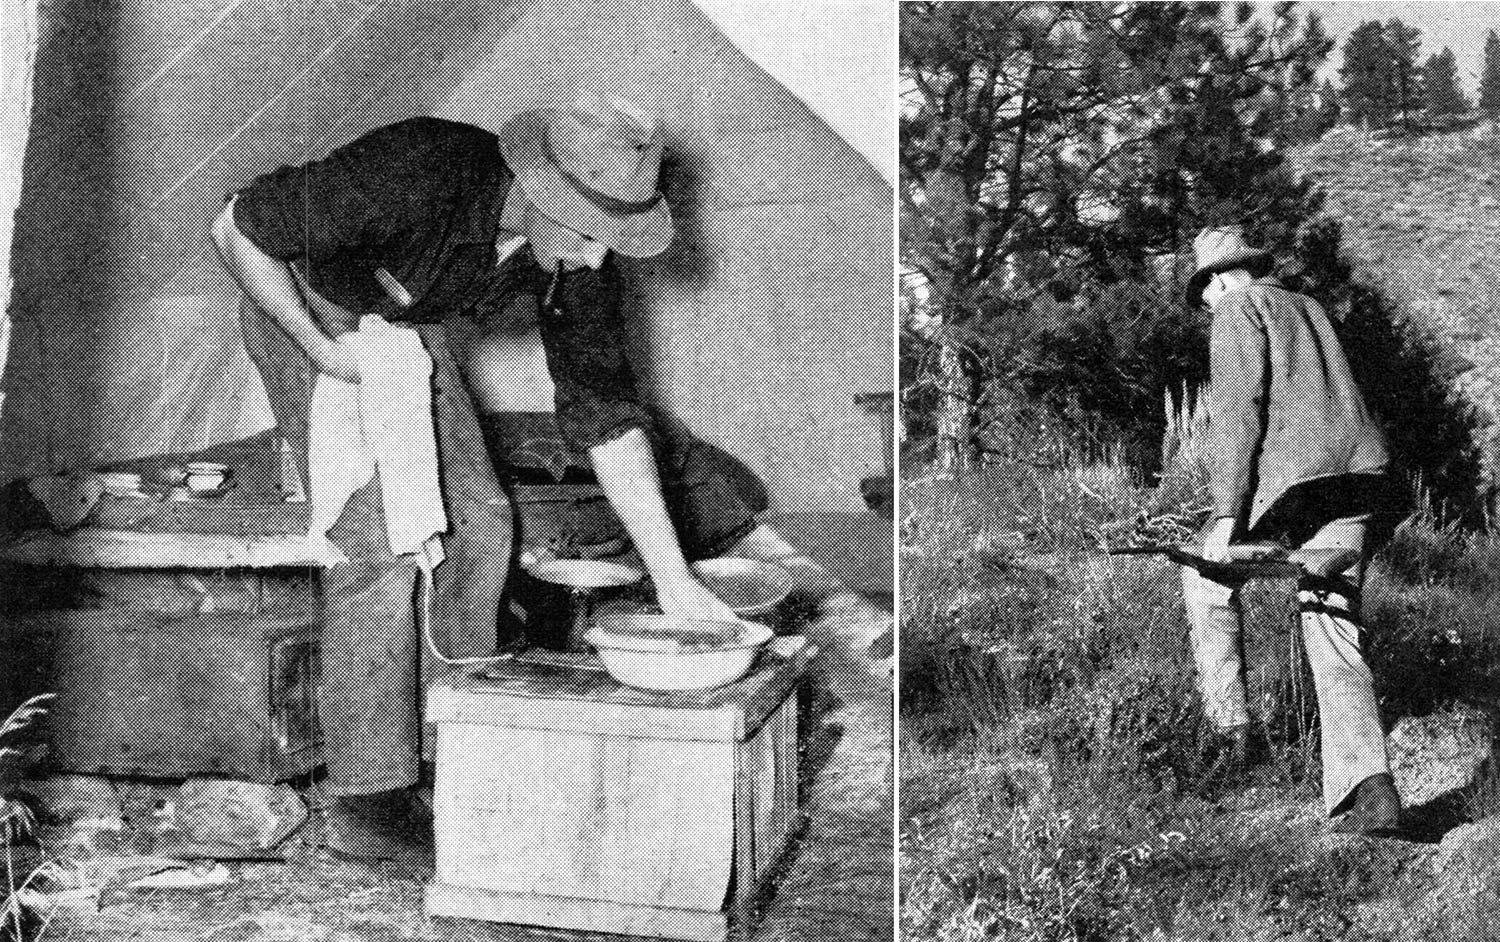 pipe-smoking hunter inside tent washes dishes; hunter carrying long gun hikes up rocky, grassy area with pine trees